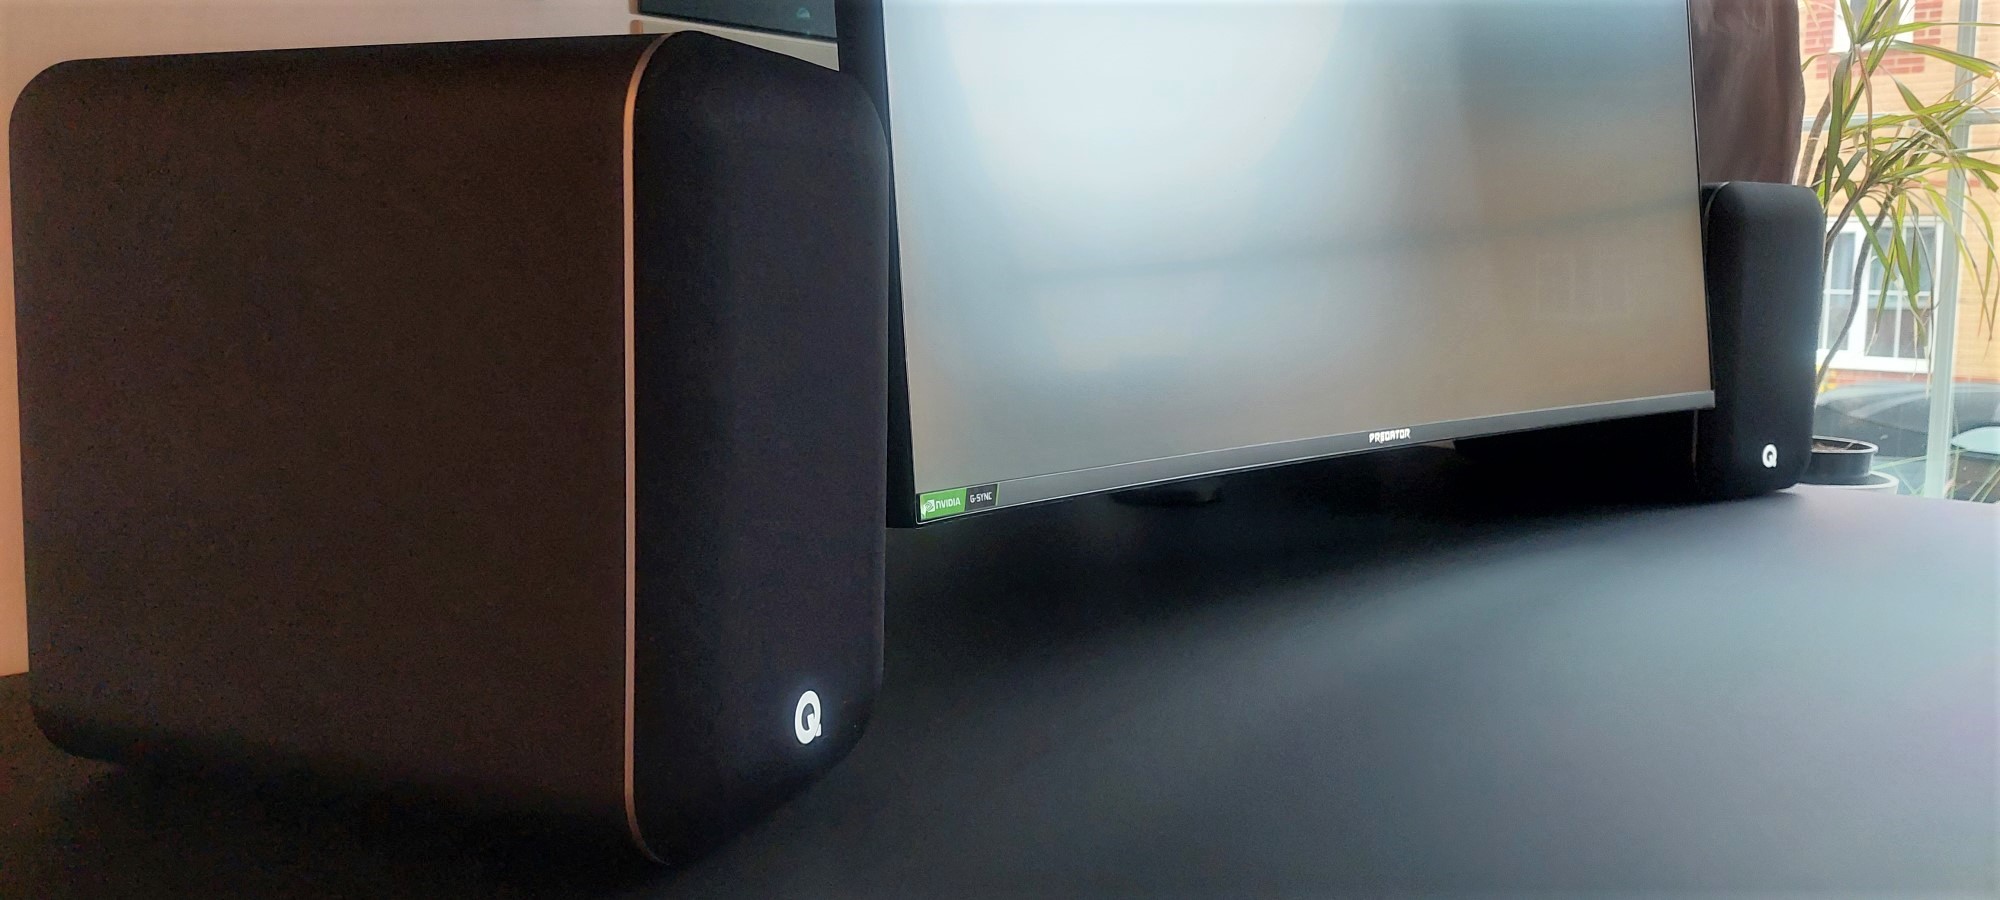 Q Acoustics M20 HD speakers review: A high-quality audio offering that I  simply cannot recommend more